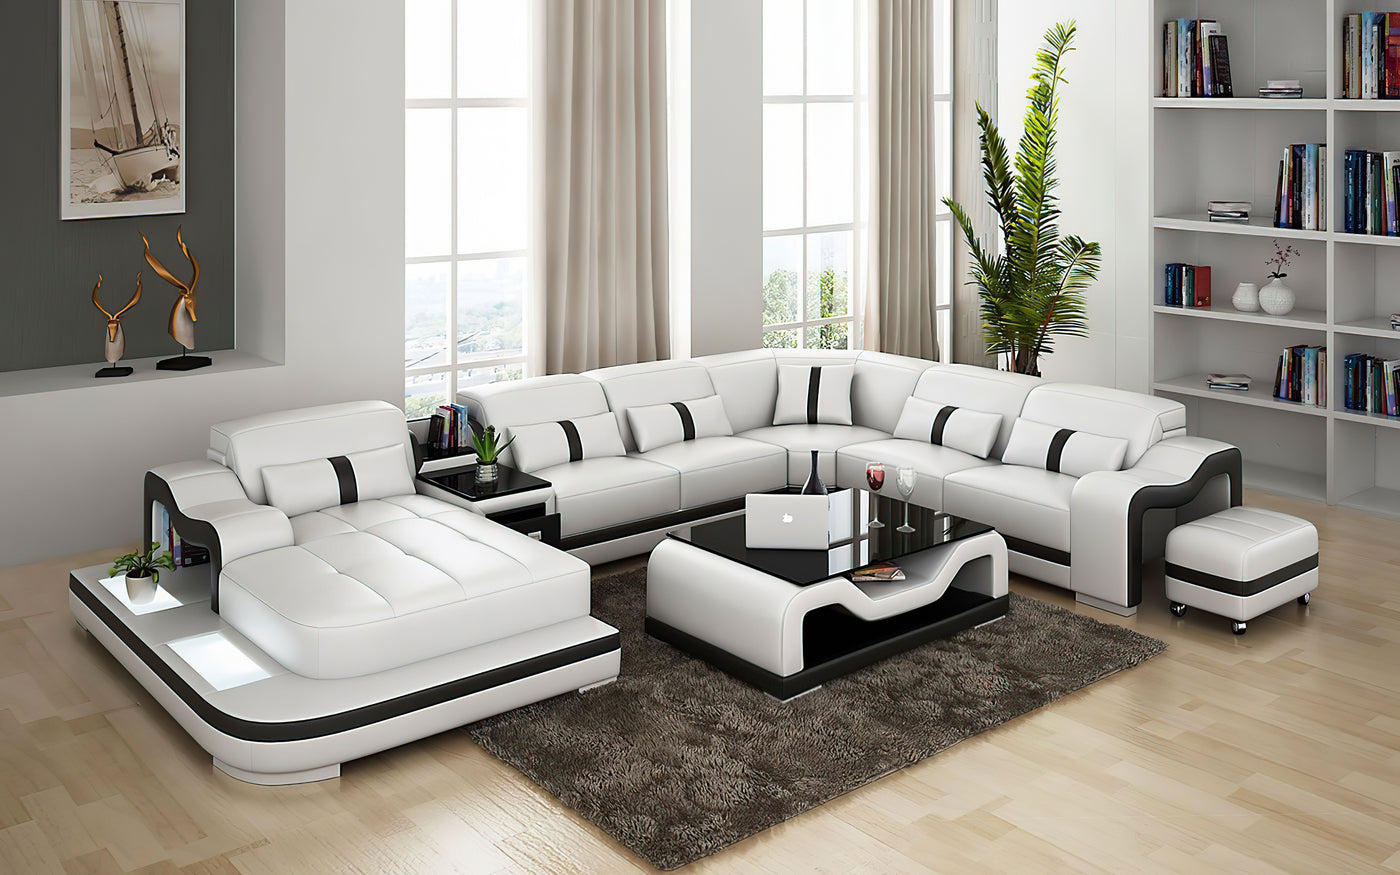 Modern Sydney Leather Sectional With Side Table&LED Light